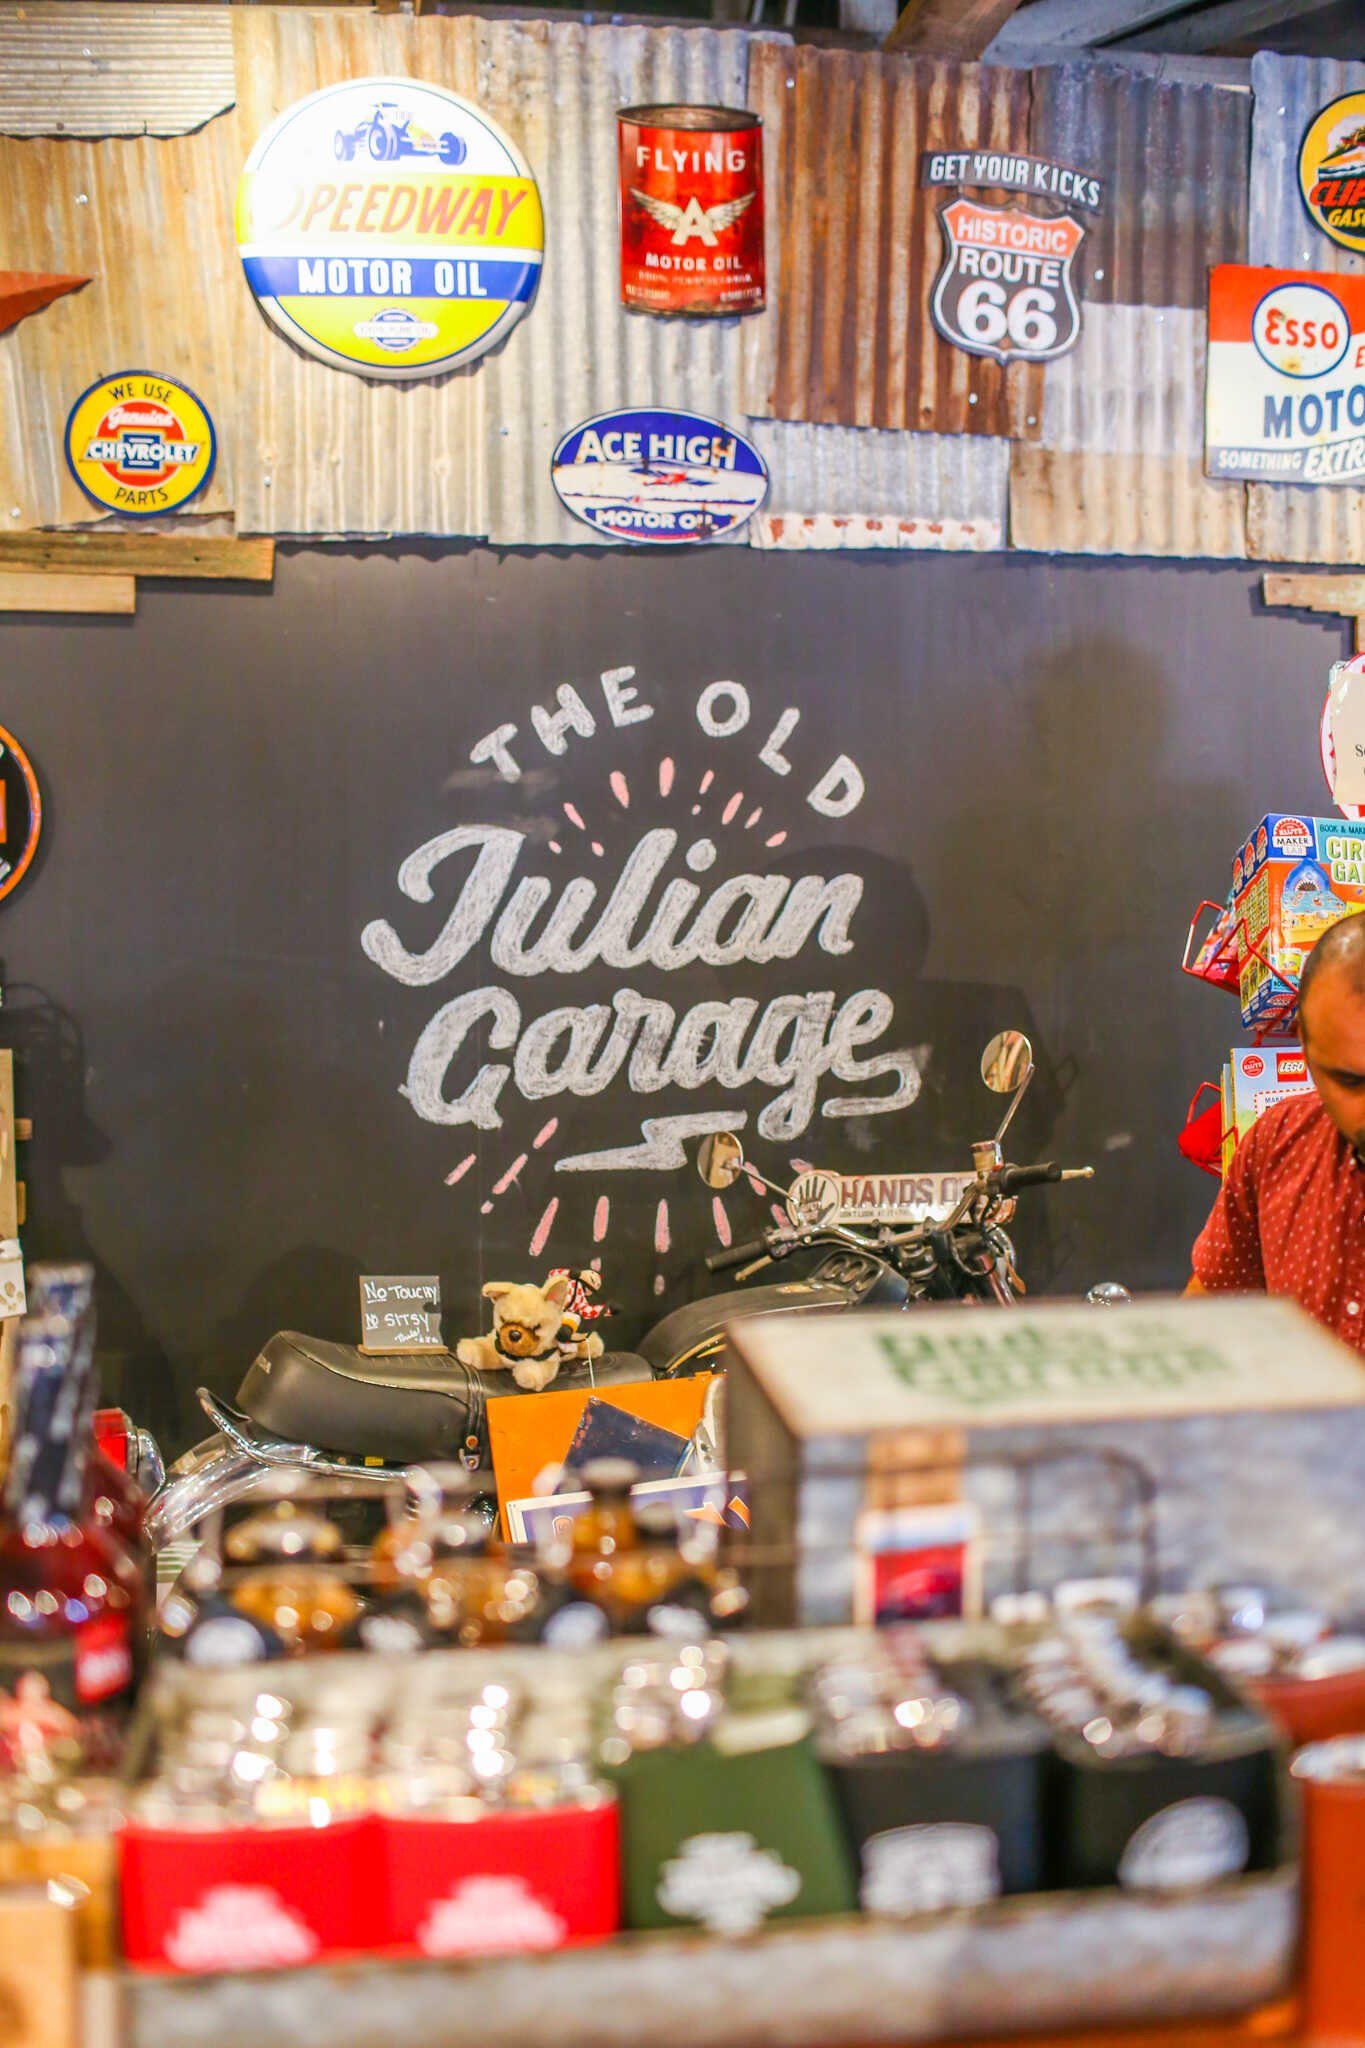 The Complete Travel Guide to Julian, California - Funky gifts from The Old Julian Garage shop.